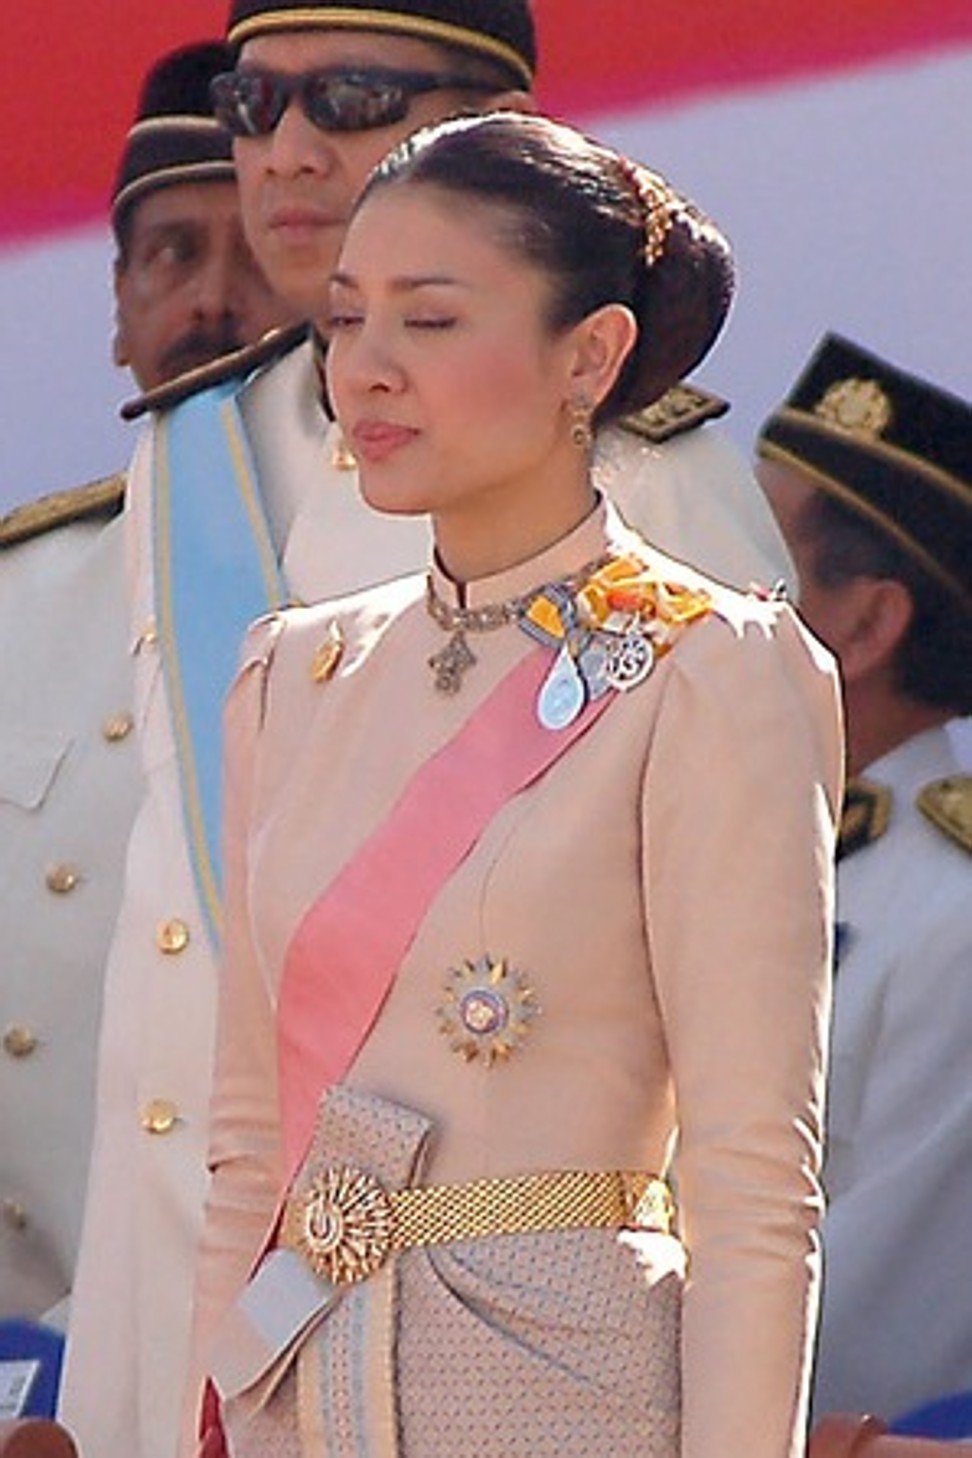 Srirasmi Suwadee is said to currently live in seclusion in Western Thailand, outside Bangkok. Photo: Wikipedia